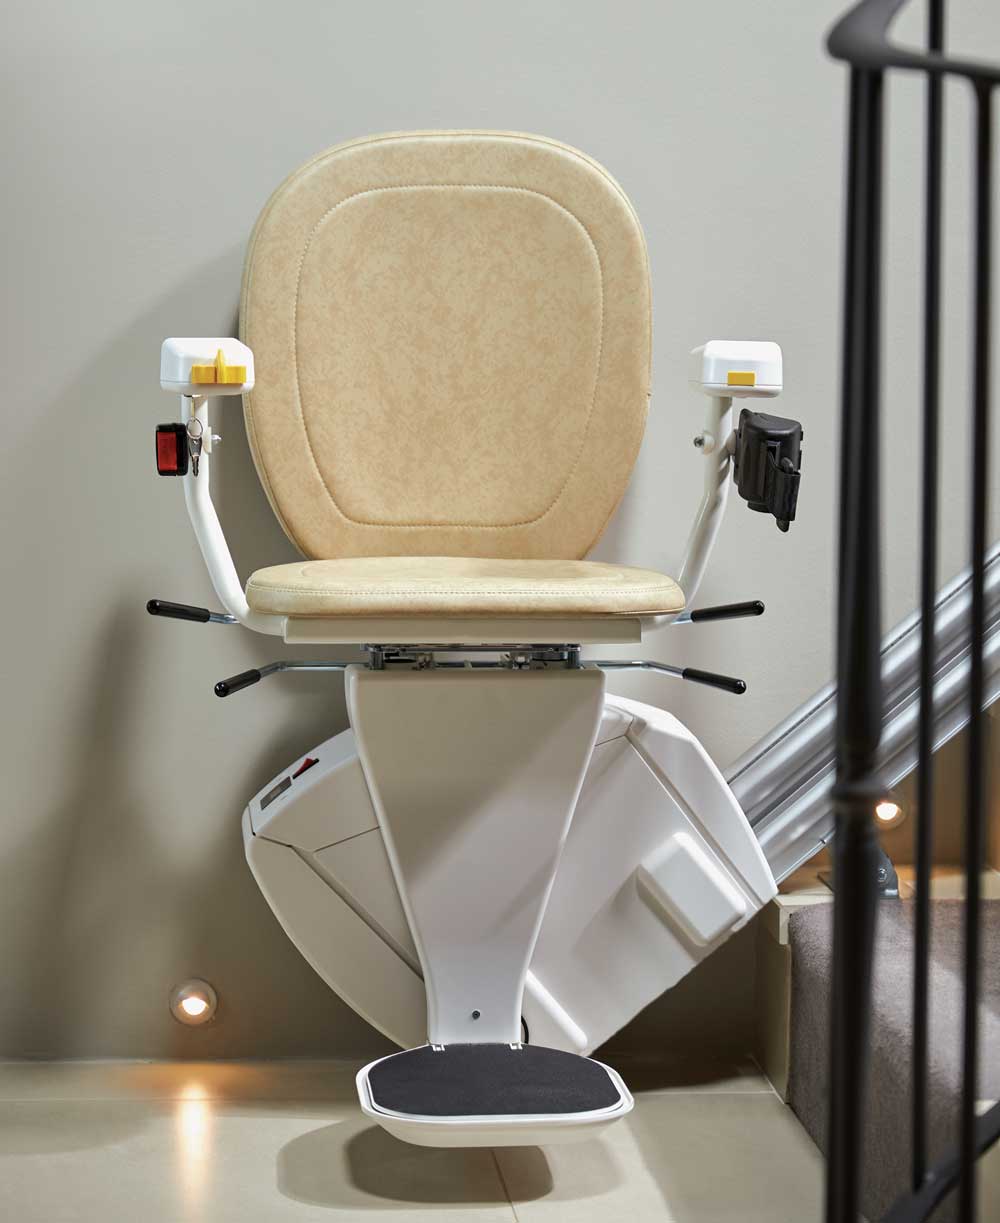 bespoke-stairlifts-synergy-straight-profile-01-product-web-tab